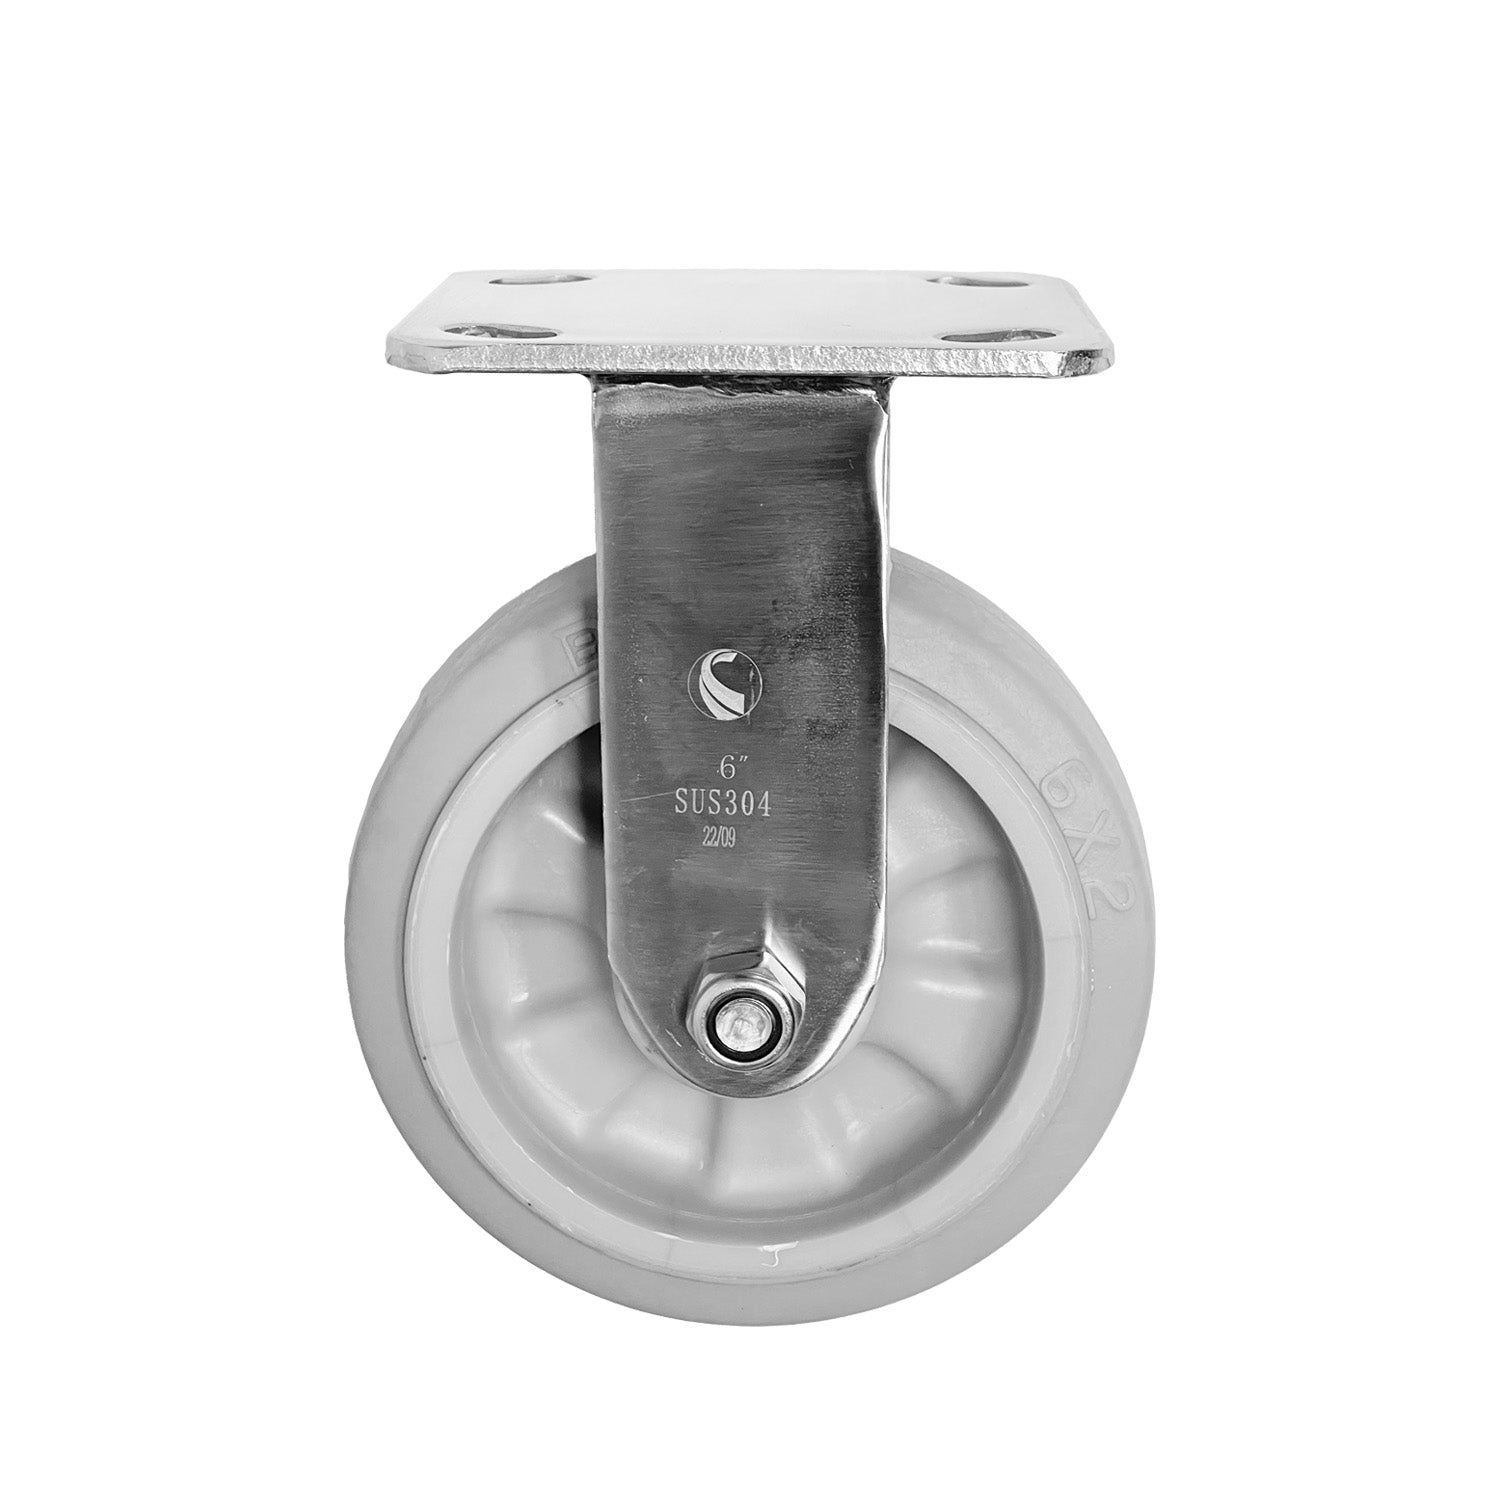 An image of a 6" stationary caster wheel, designed for various applications. The caster wheel features a sturdy construction with a diameter of 6 inches, providing stability and support. he wheel is made from durable materials, ensuring long-lasting performance and reliability.